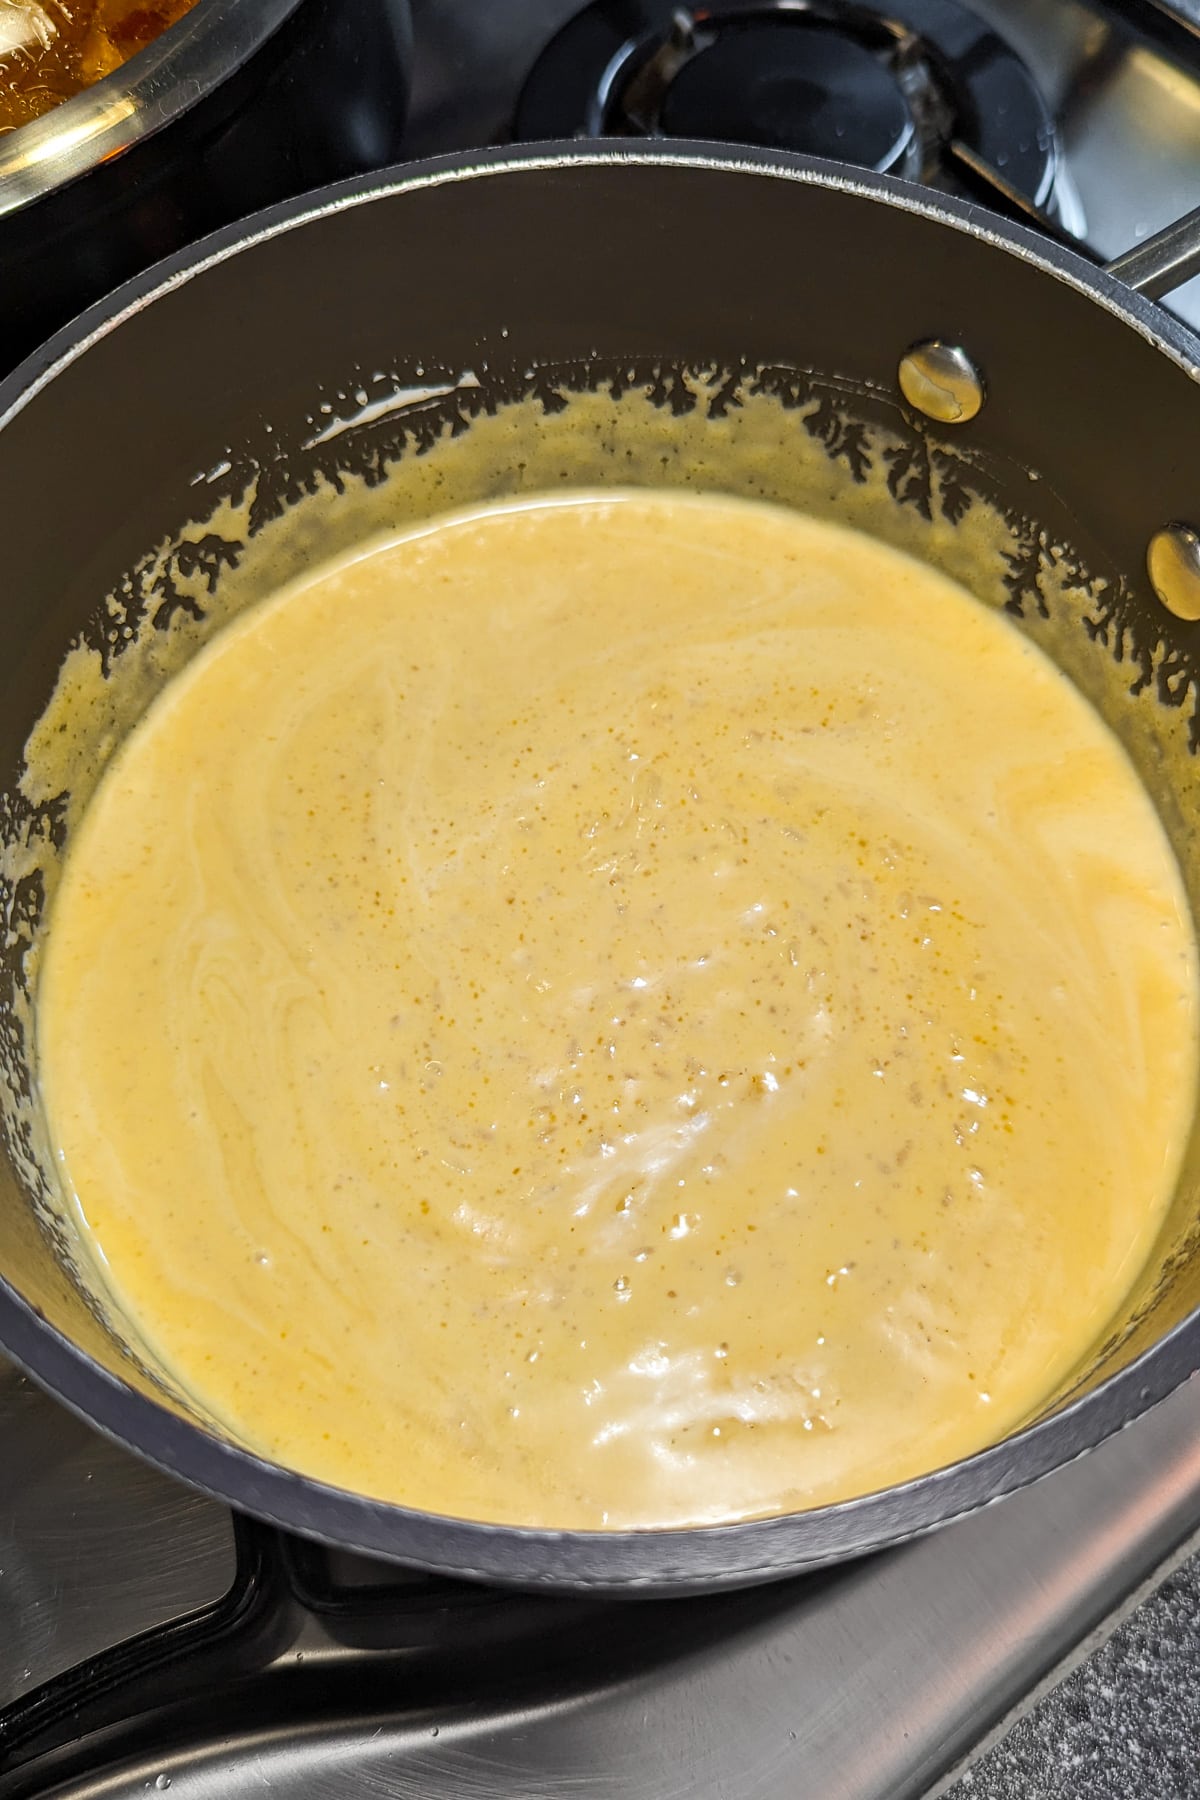 Pumpkin rice pudding mix in a pan on the stove.